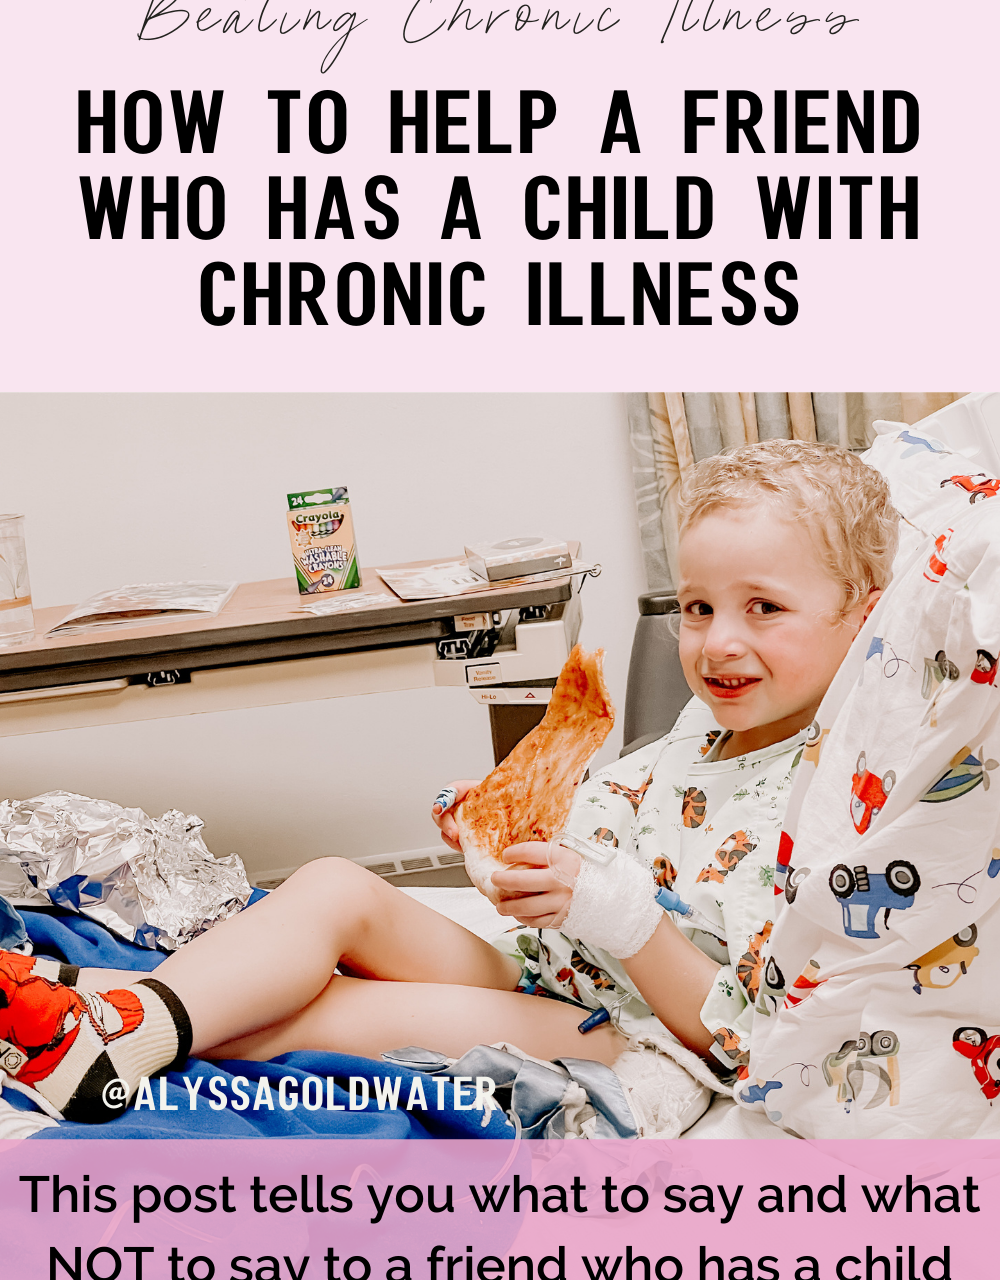 How to support a friend whose child has just been diagnosed with a chronic illness